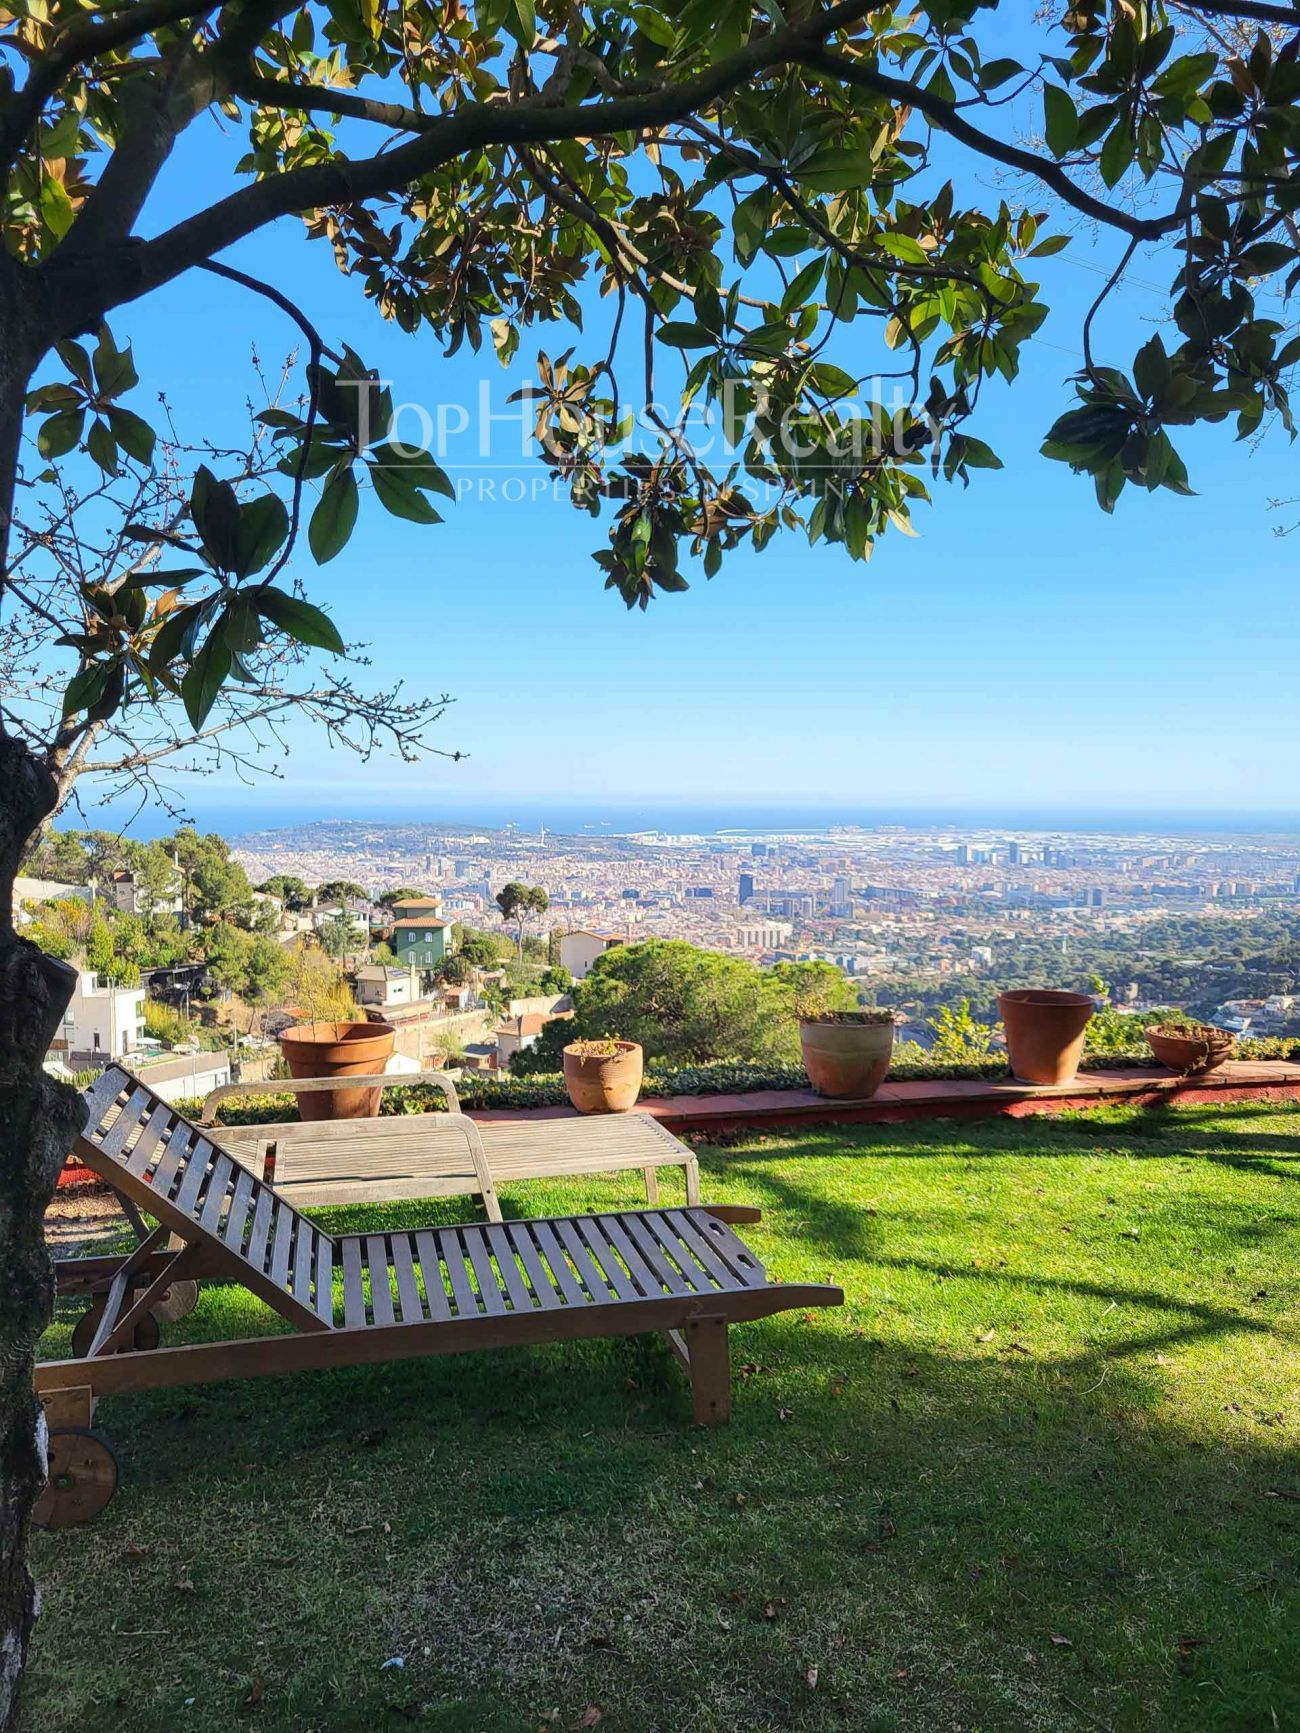 Enjoy the tranquility of Tibidabo in this stunning designer house